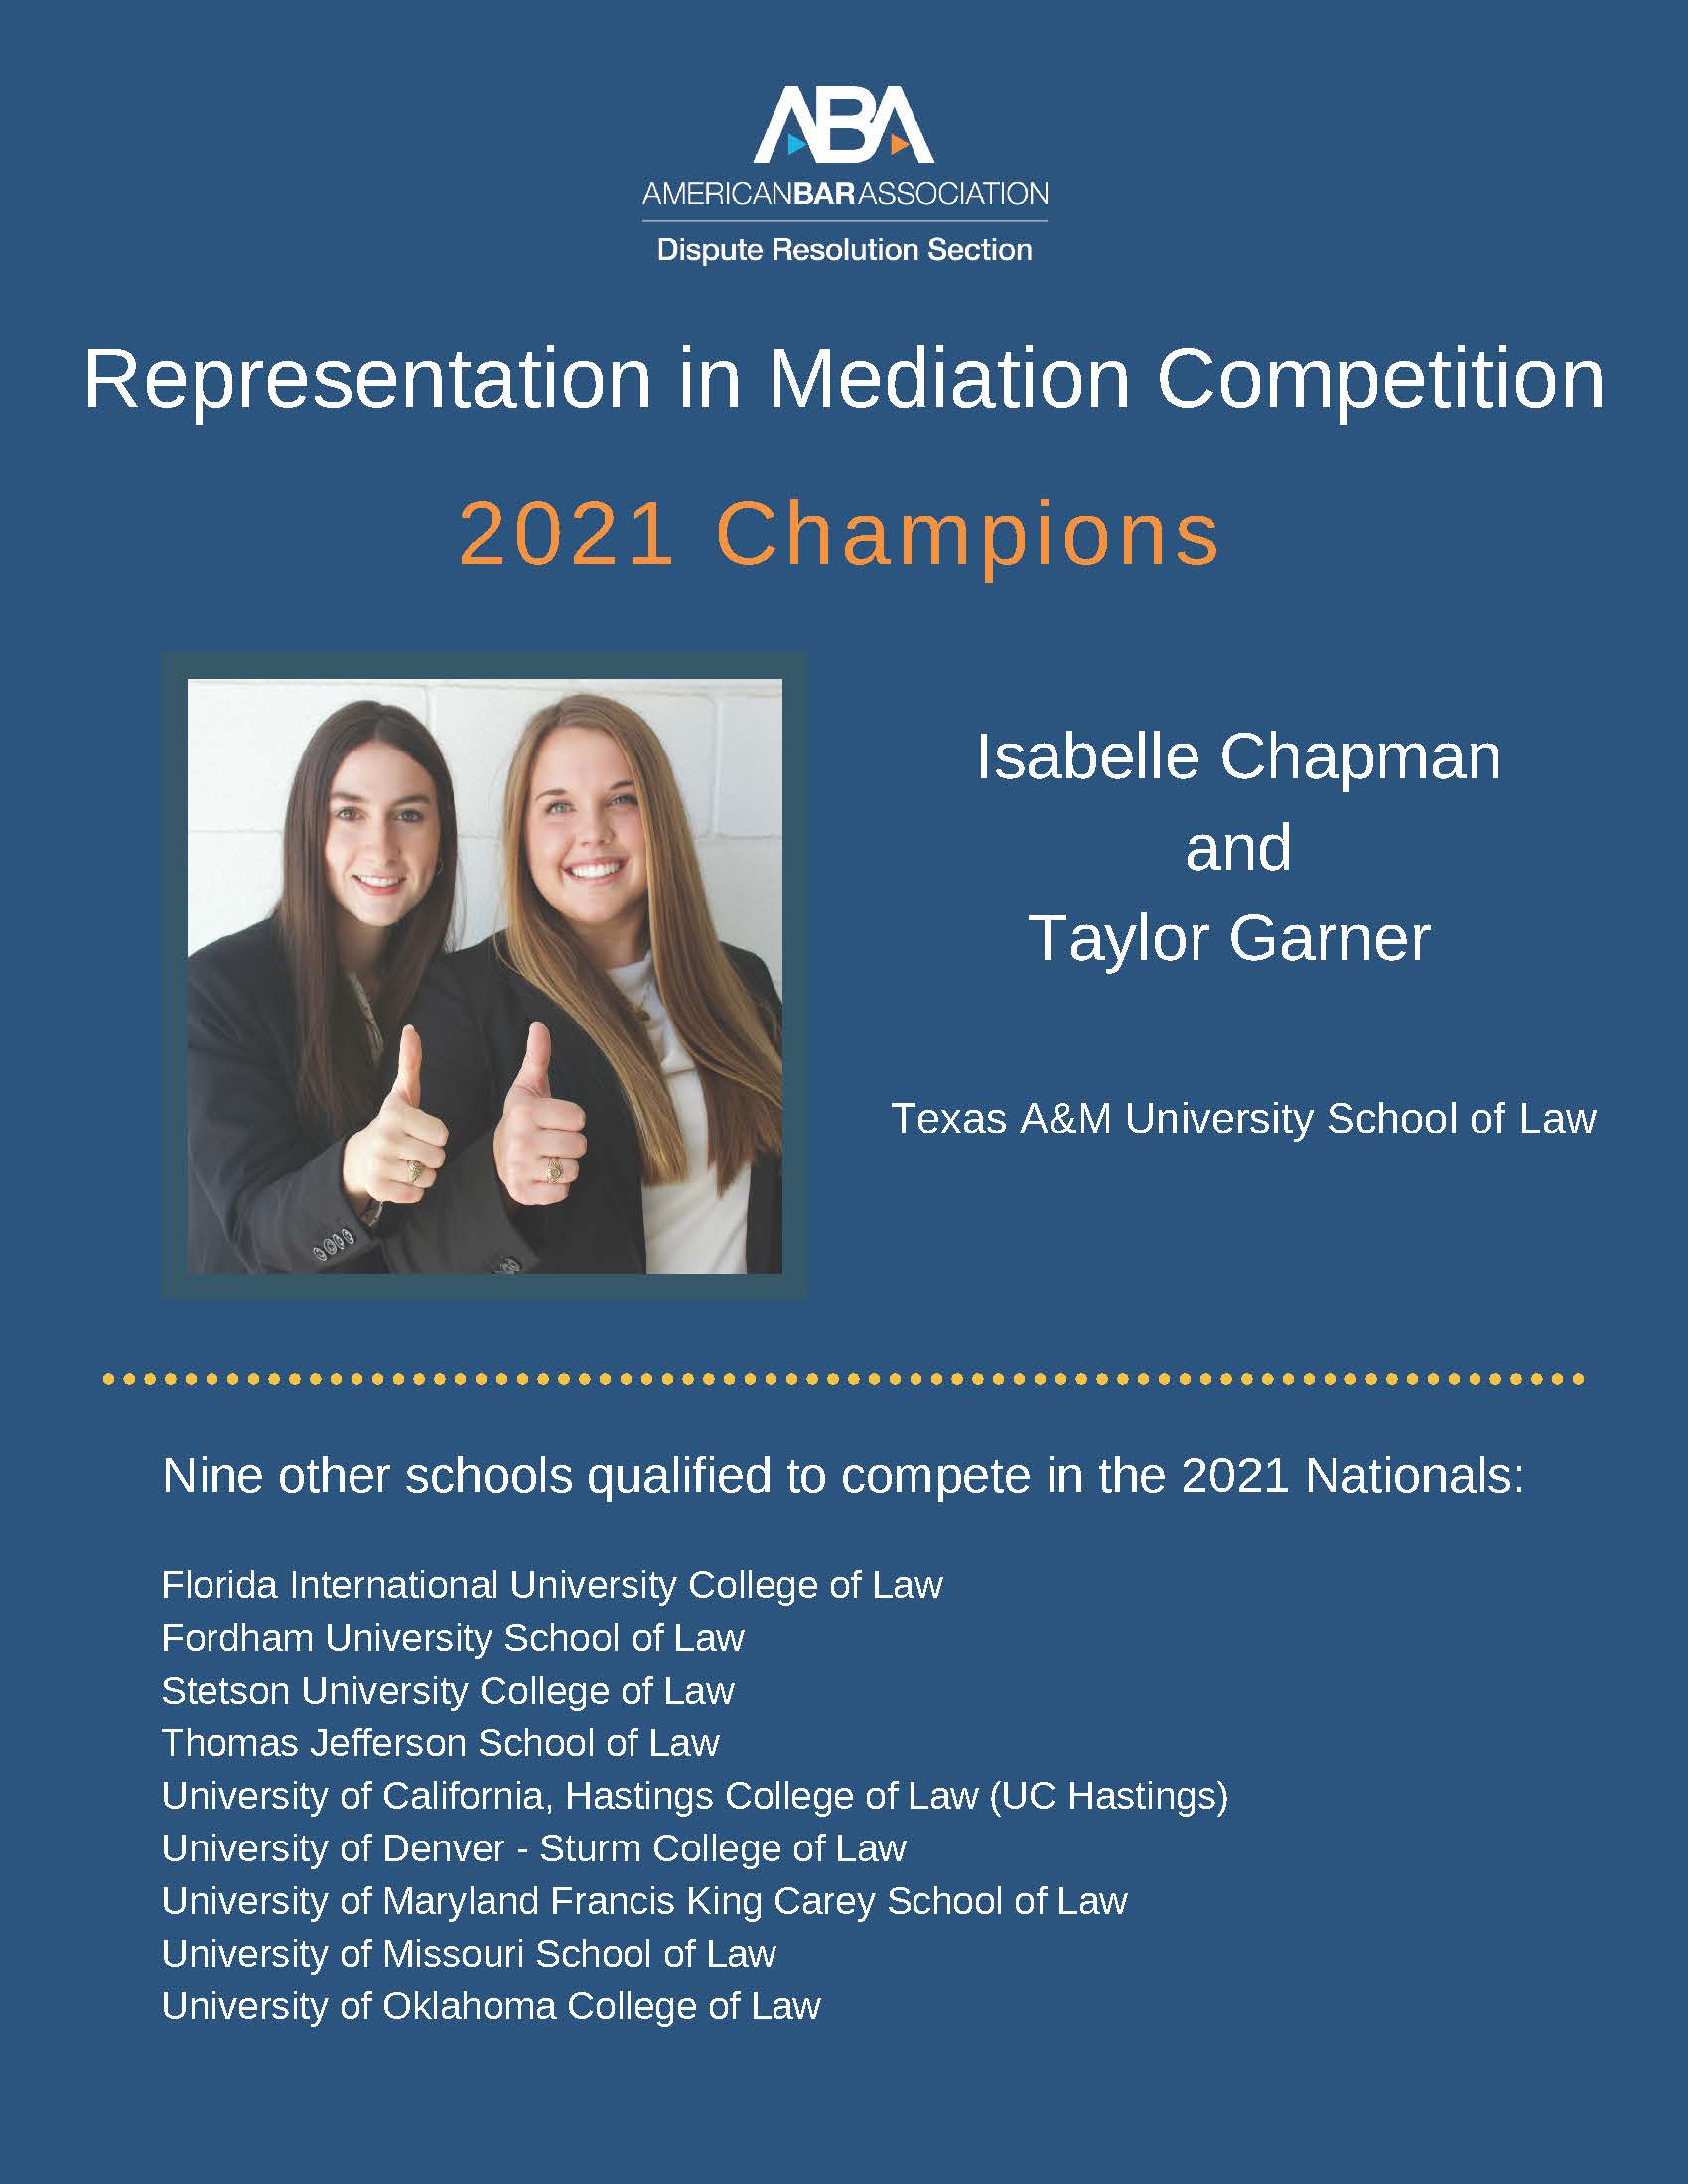 Representation in Mediation Competition 2021 Champions flyer